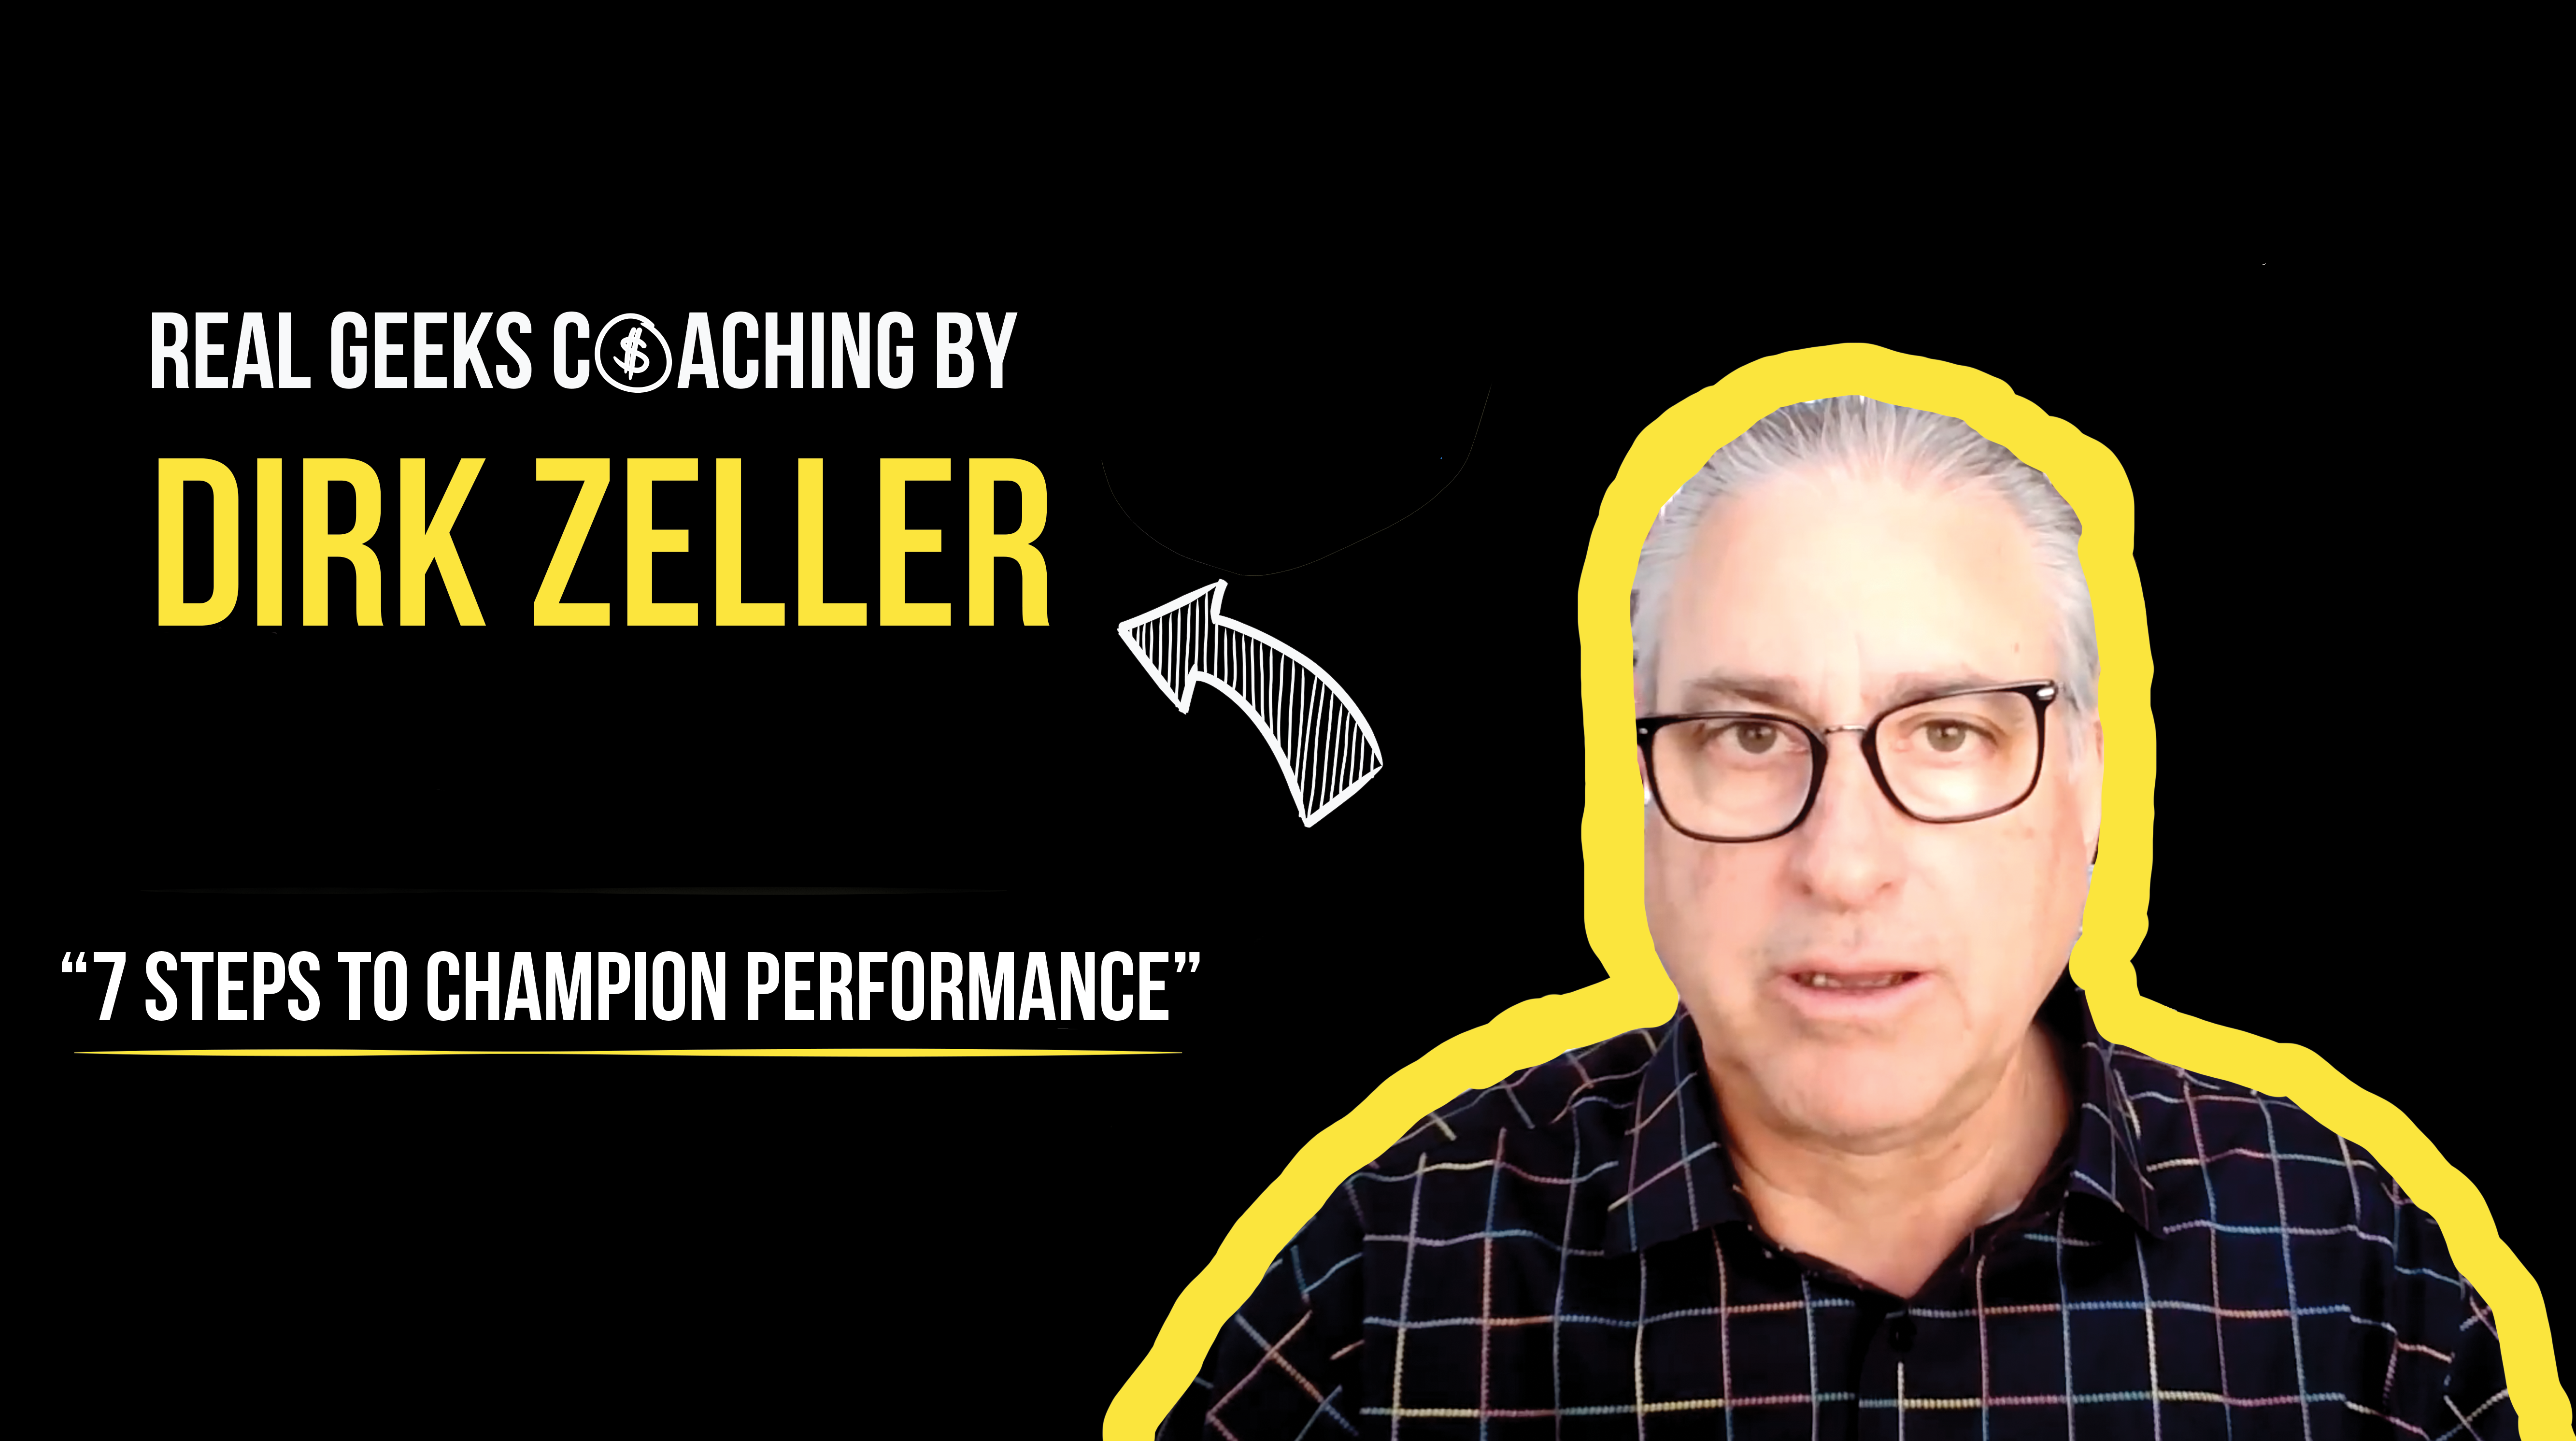 7 Steps to Champion Performance